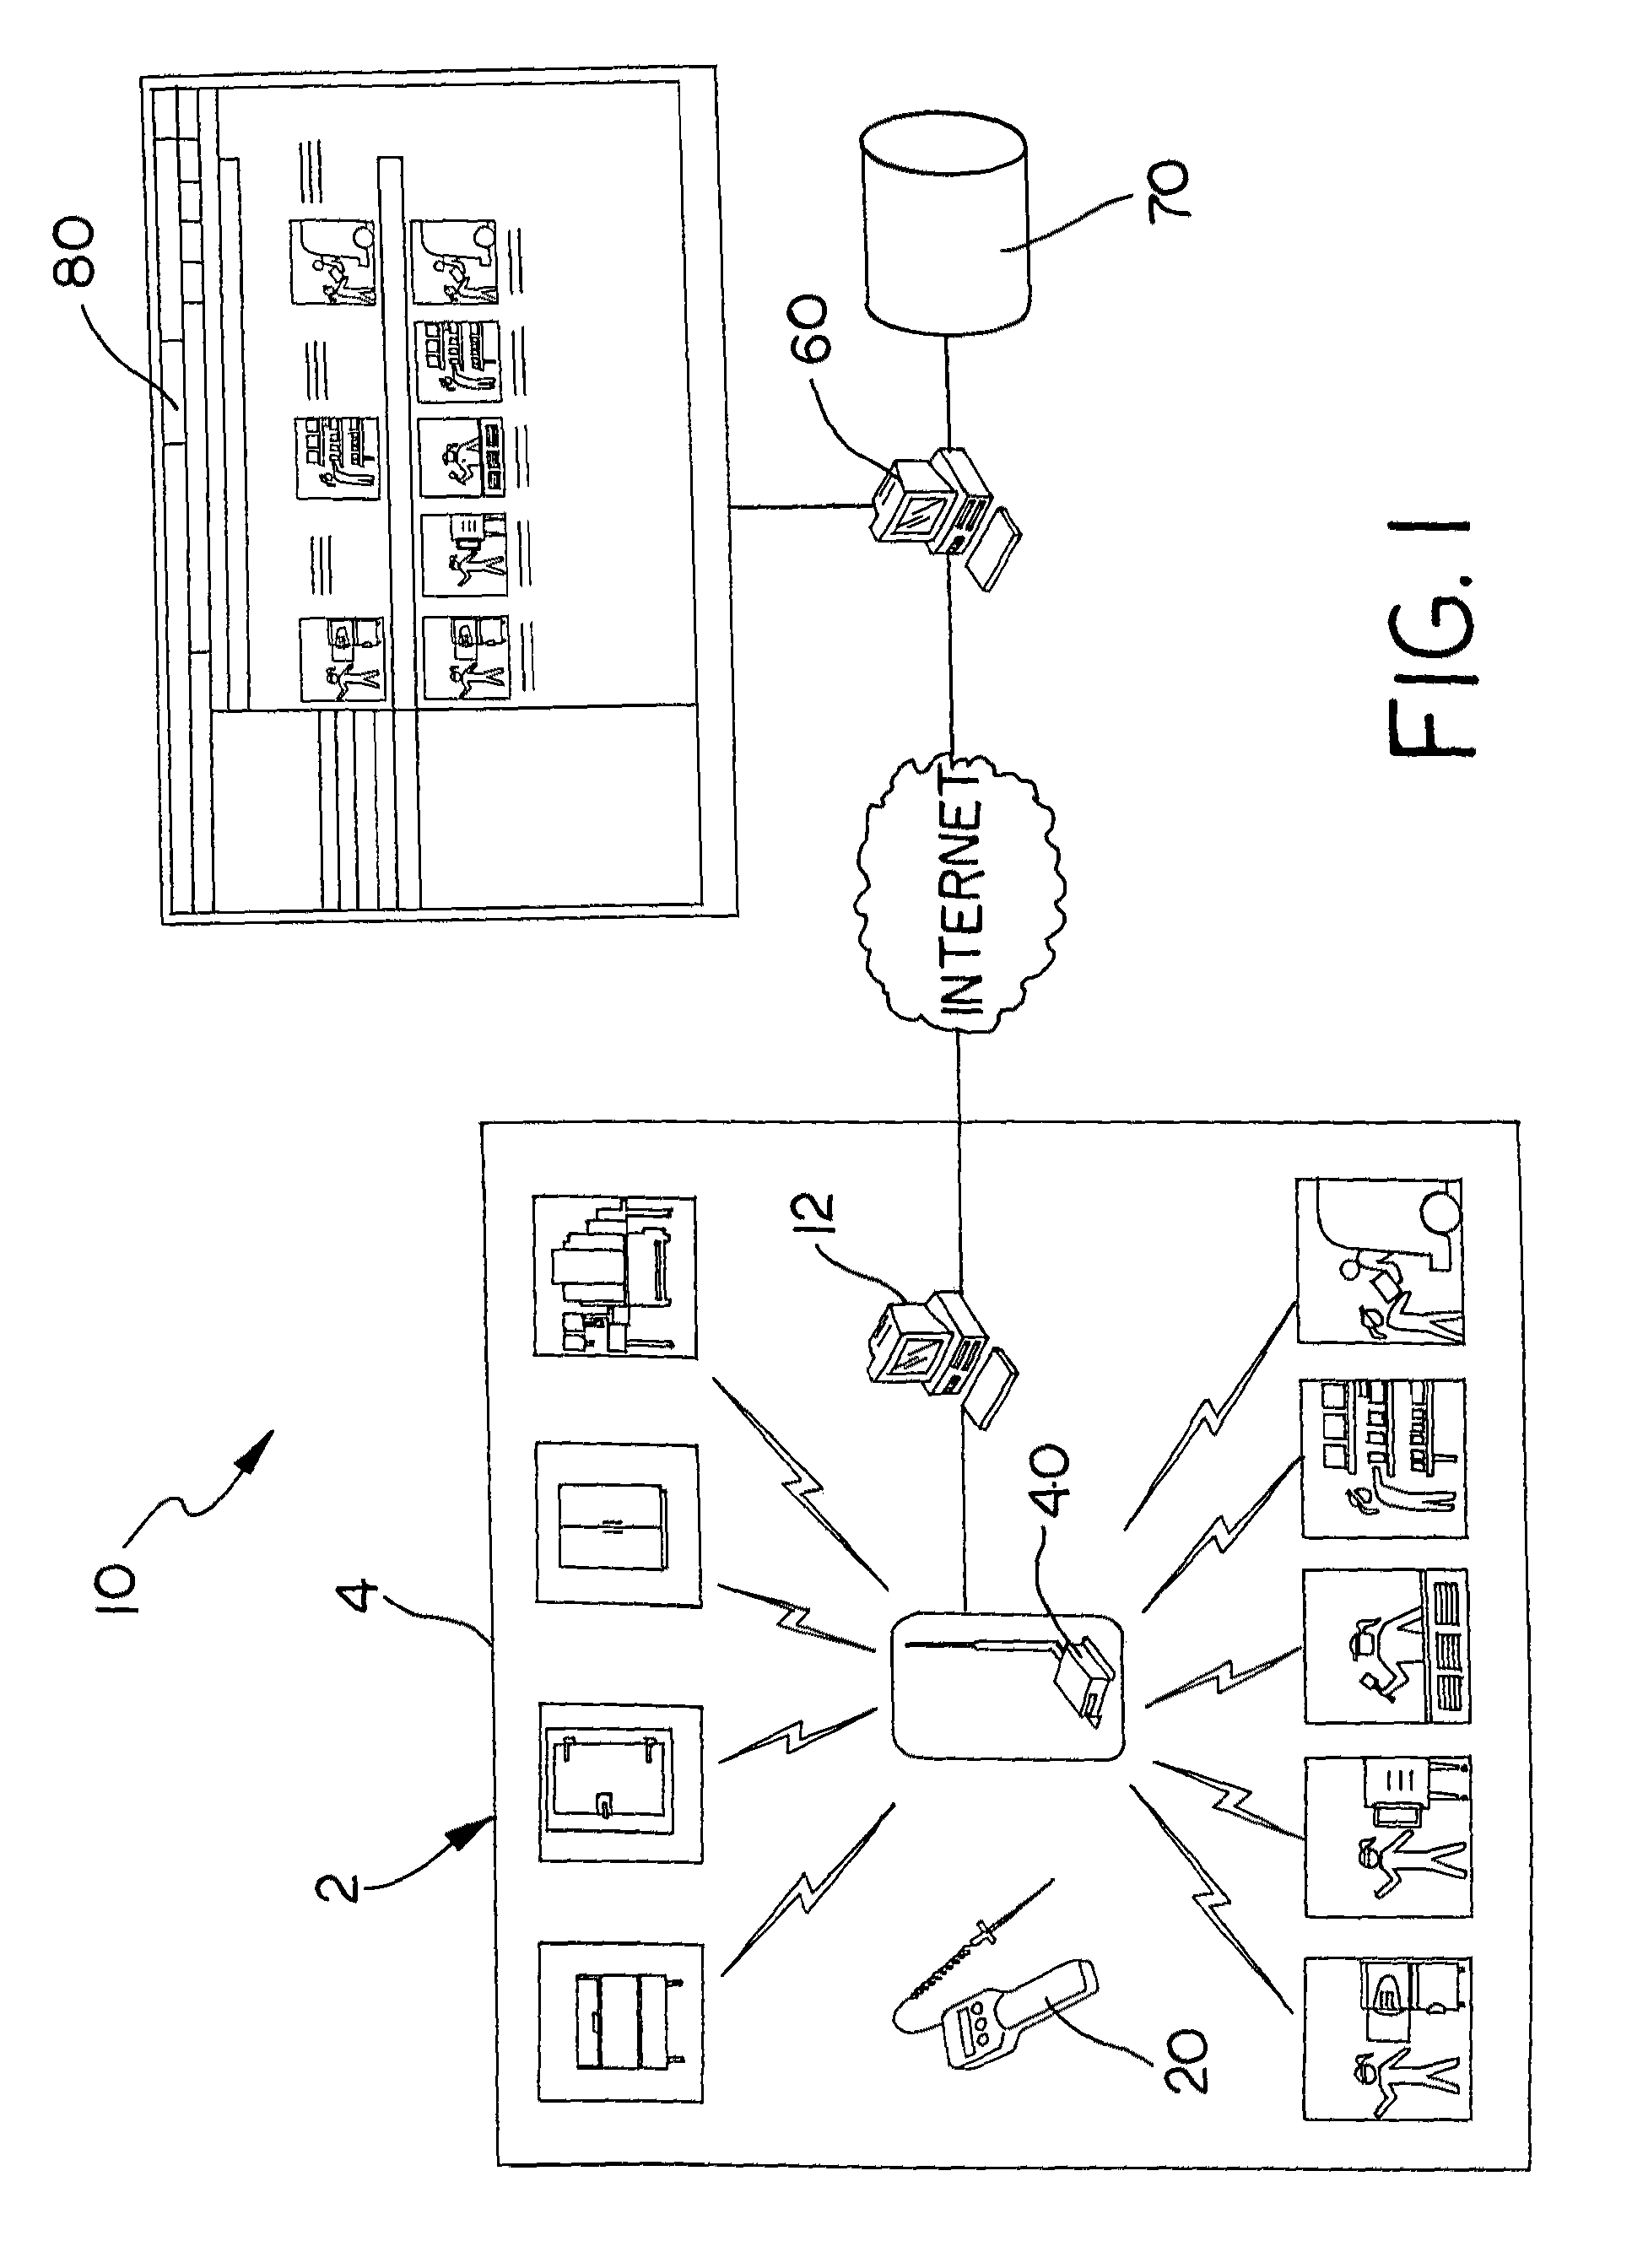 System and method for collecting, transferring and managing quality control data